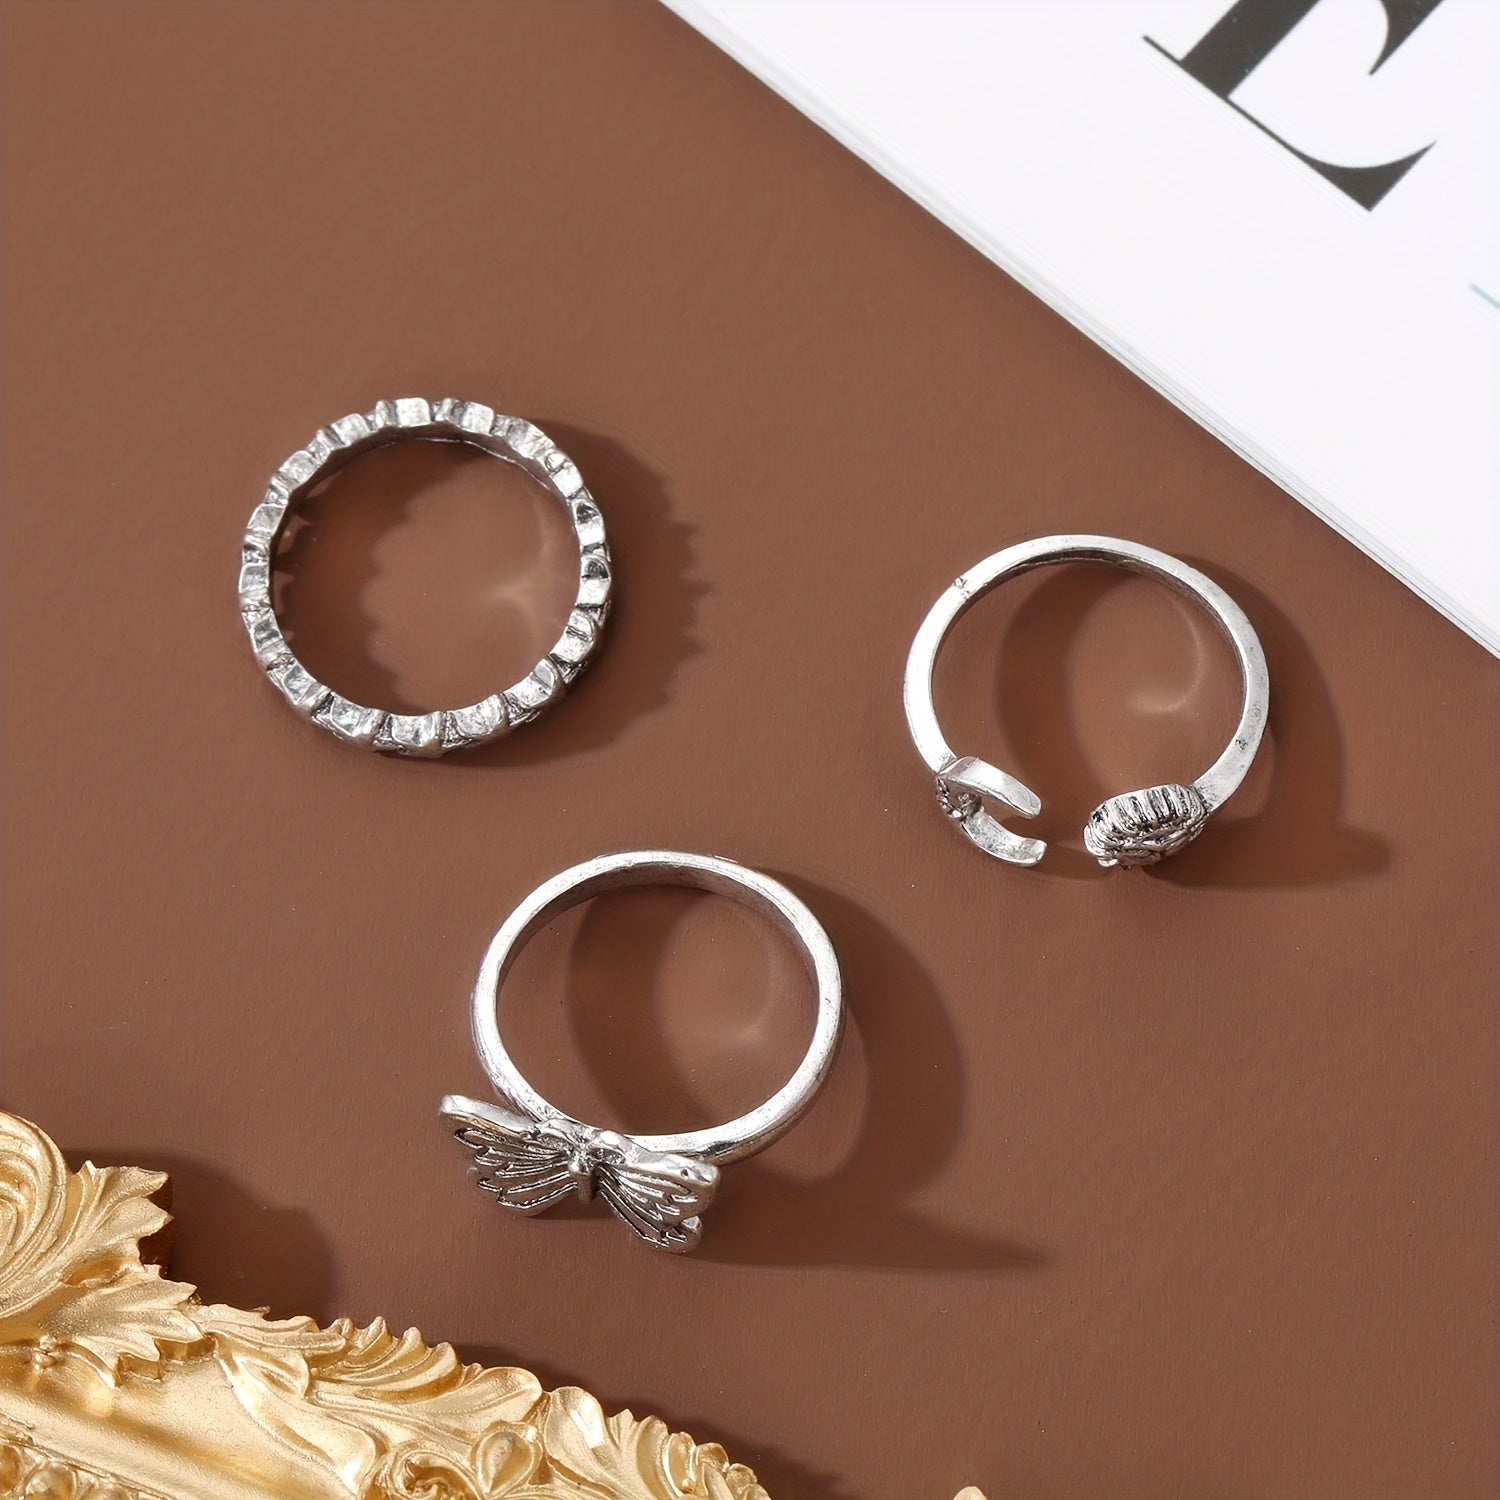 Vintage Style Finger Ring Set With Butterfly & Moon & Star Shape Pattern Opening Finger Ring Set